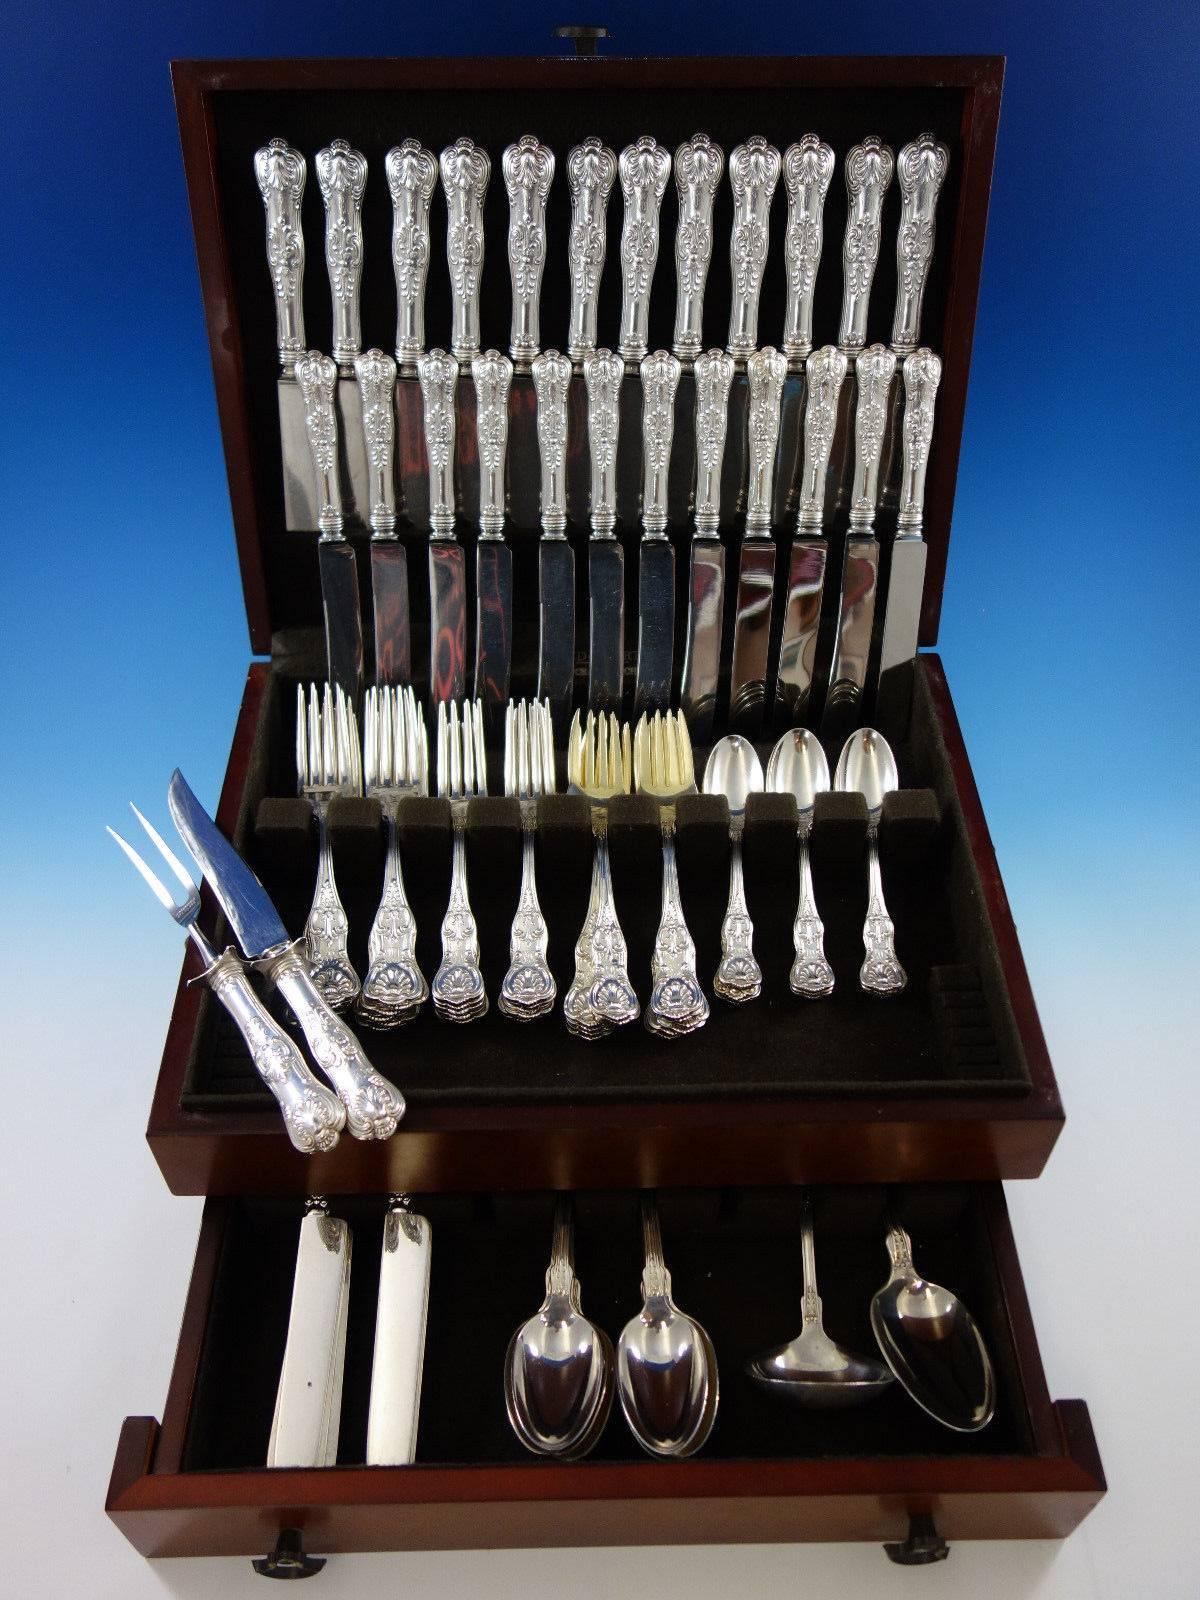 Dinner size King Edward by Gorham sterling silver flatware set, 32 pieces. This set includes: 

eight dinner size knives, 9 5/8